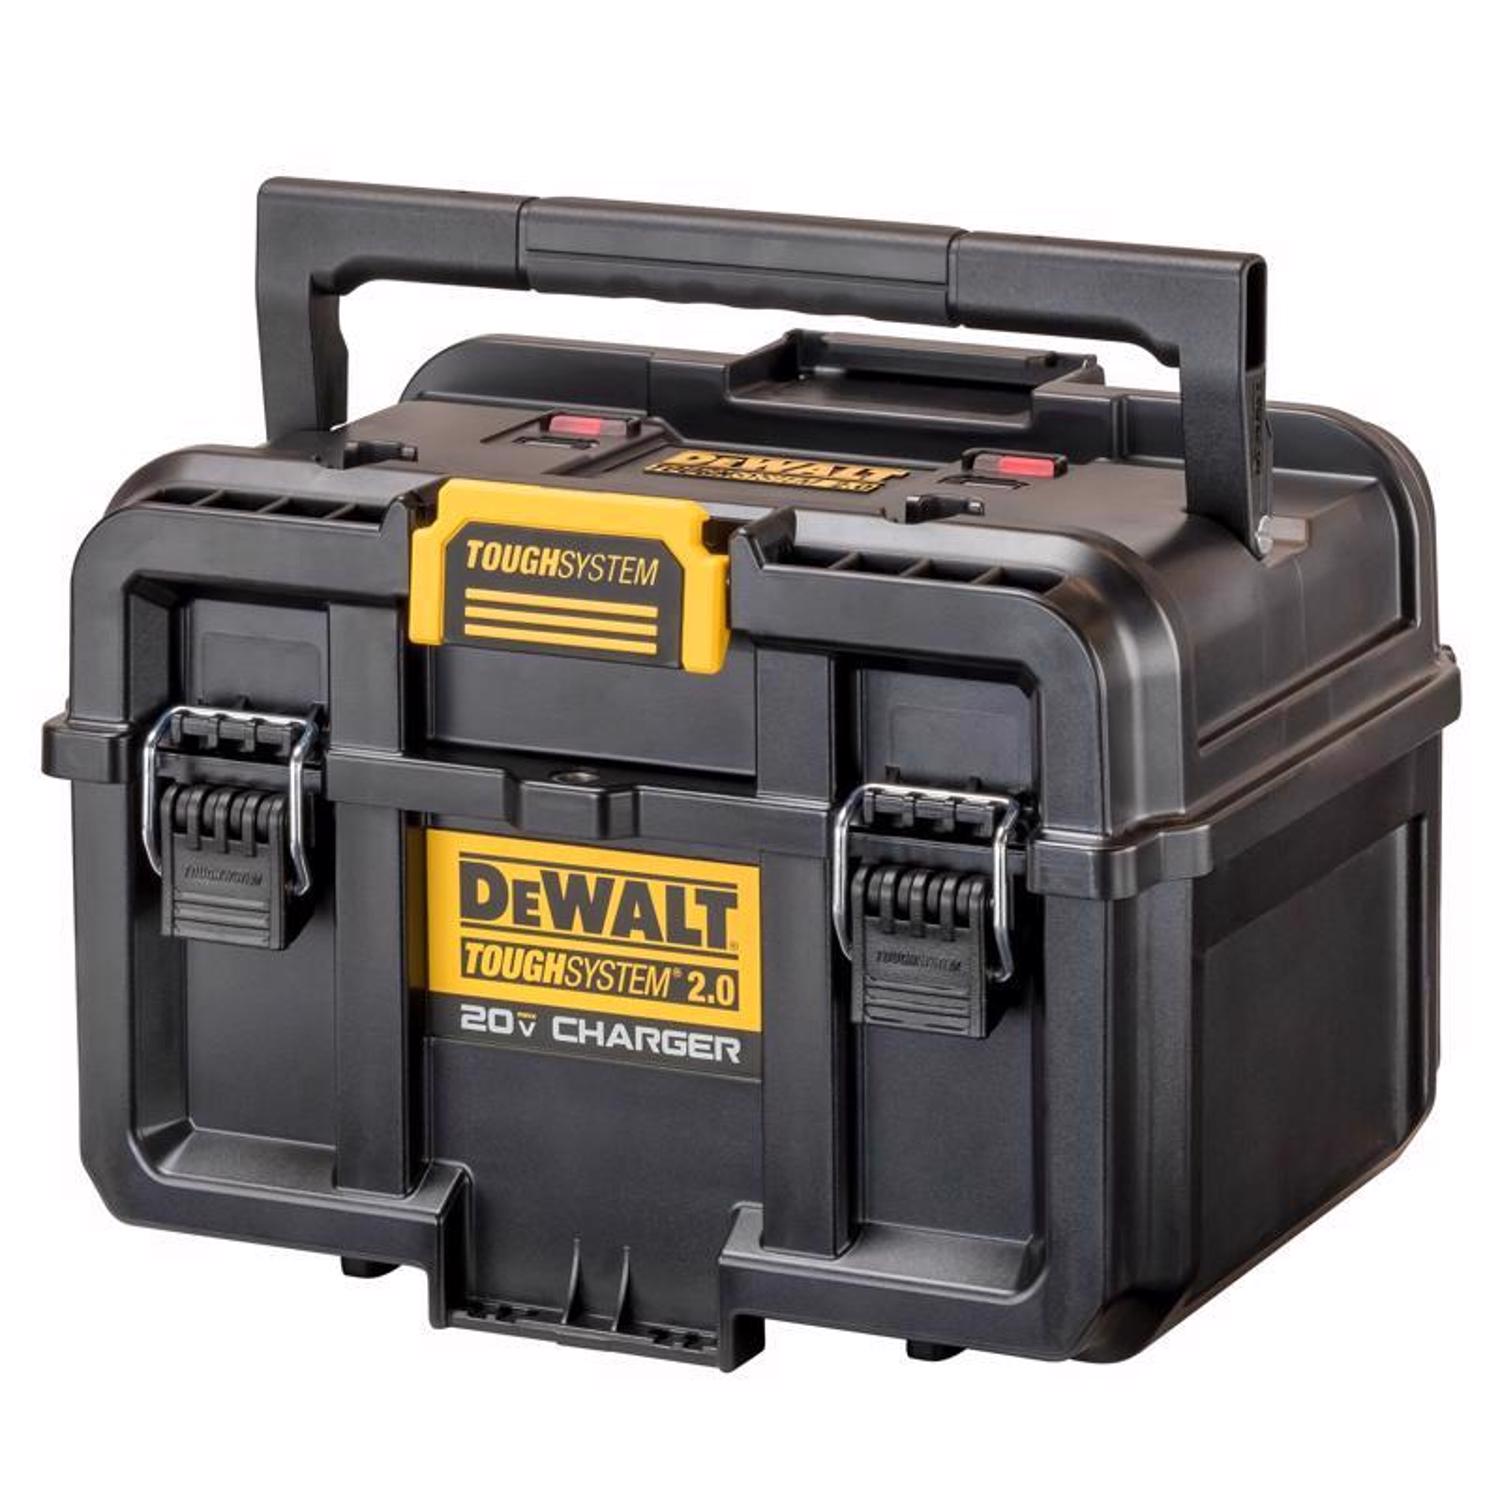 Photos - Power Tool Battery DeWALT 20V Tough System 2.0 DWST08050 Lithium-Ion Box Battery Charger Box 